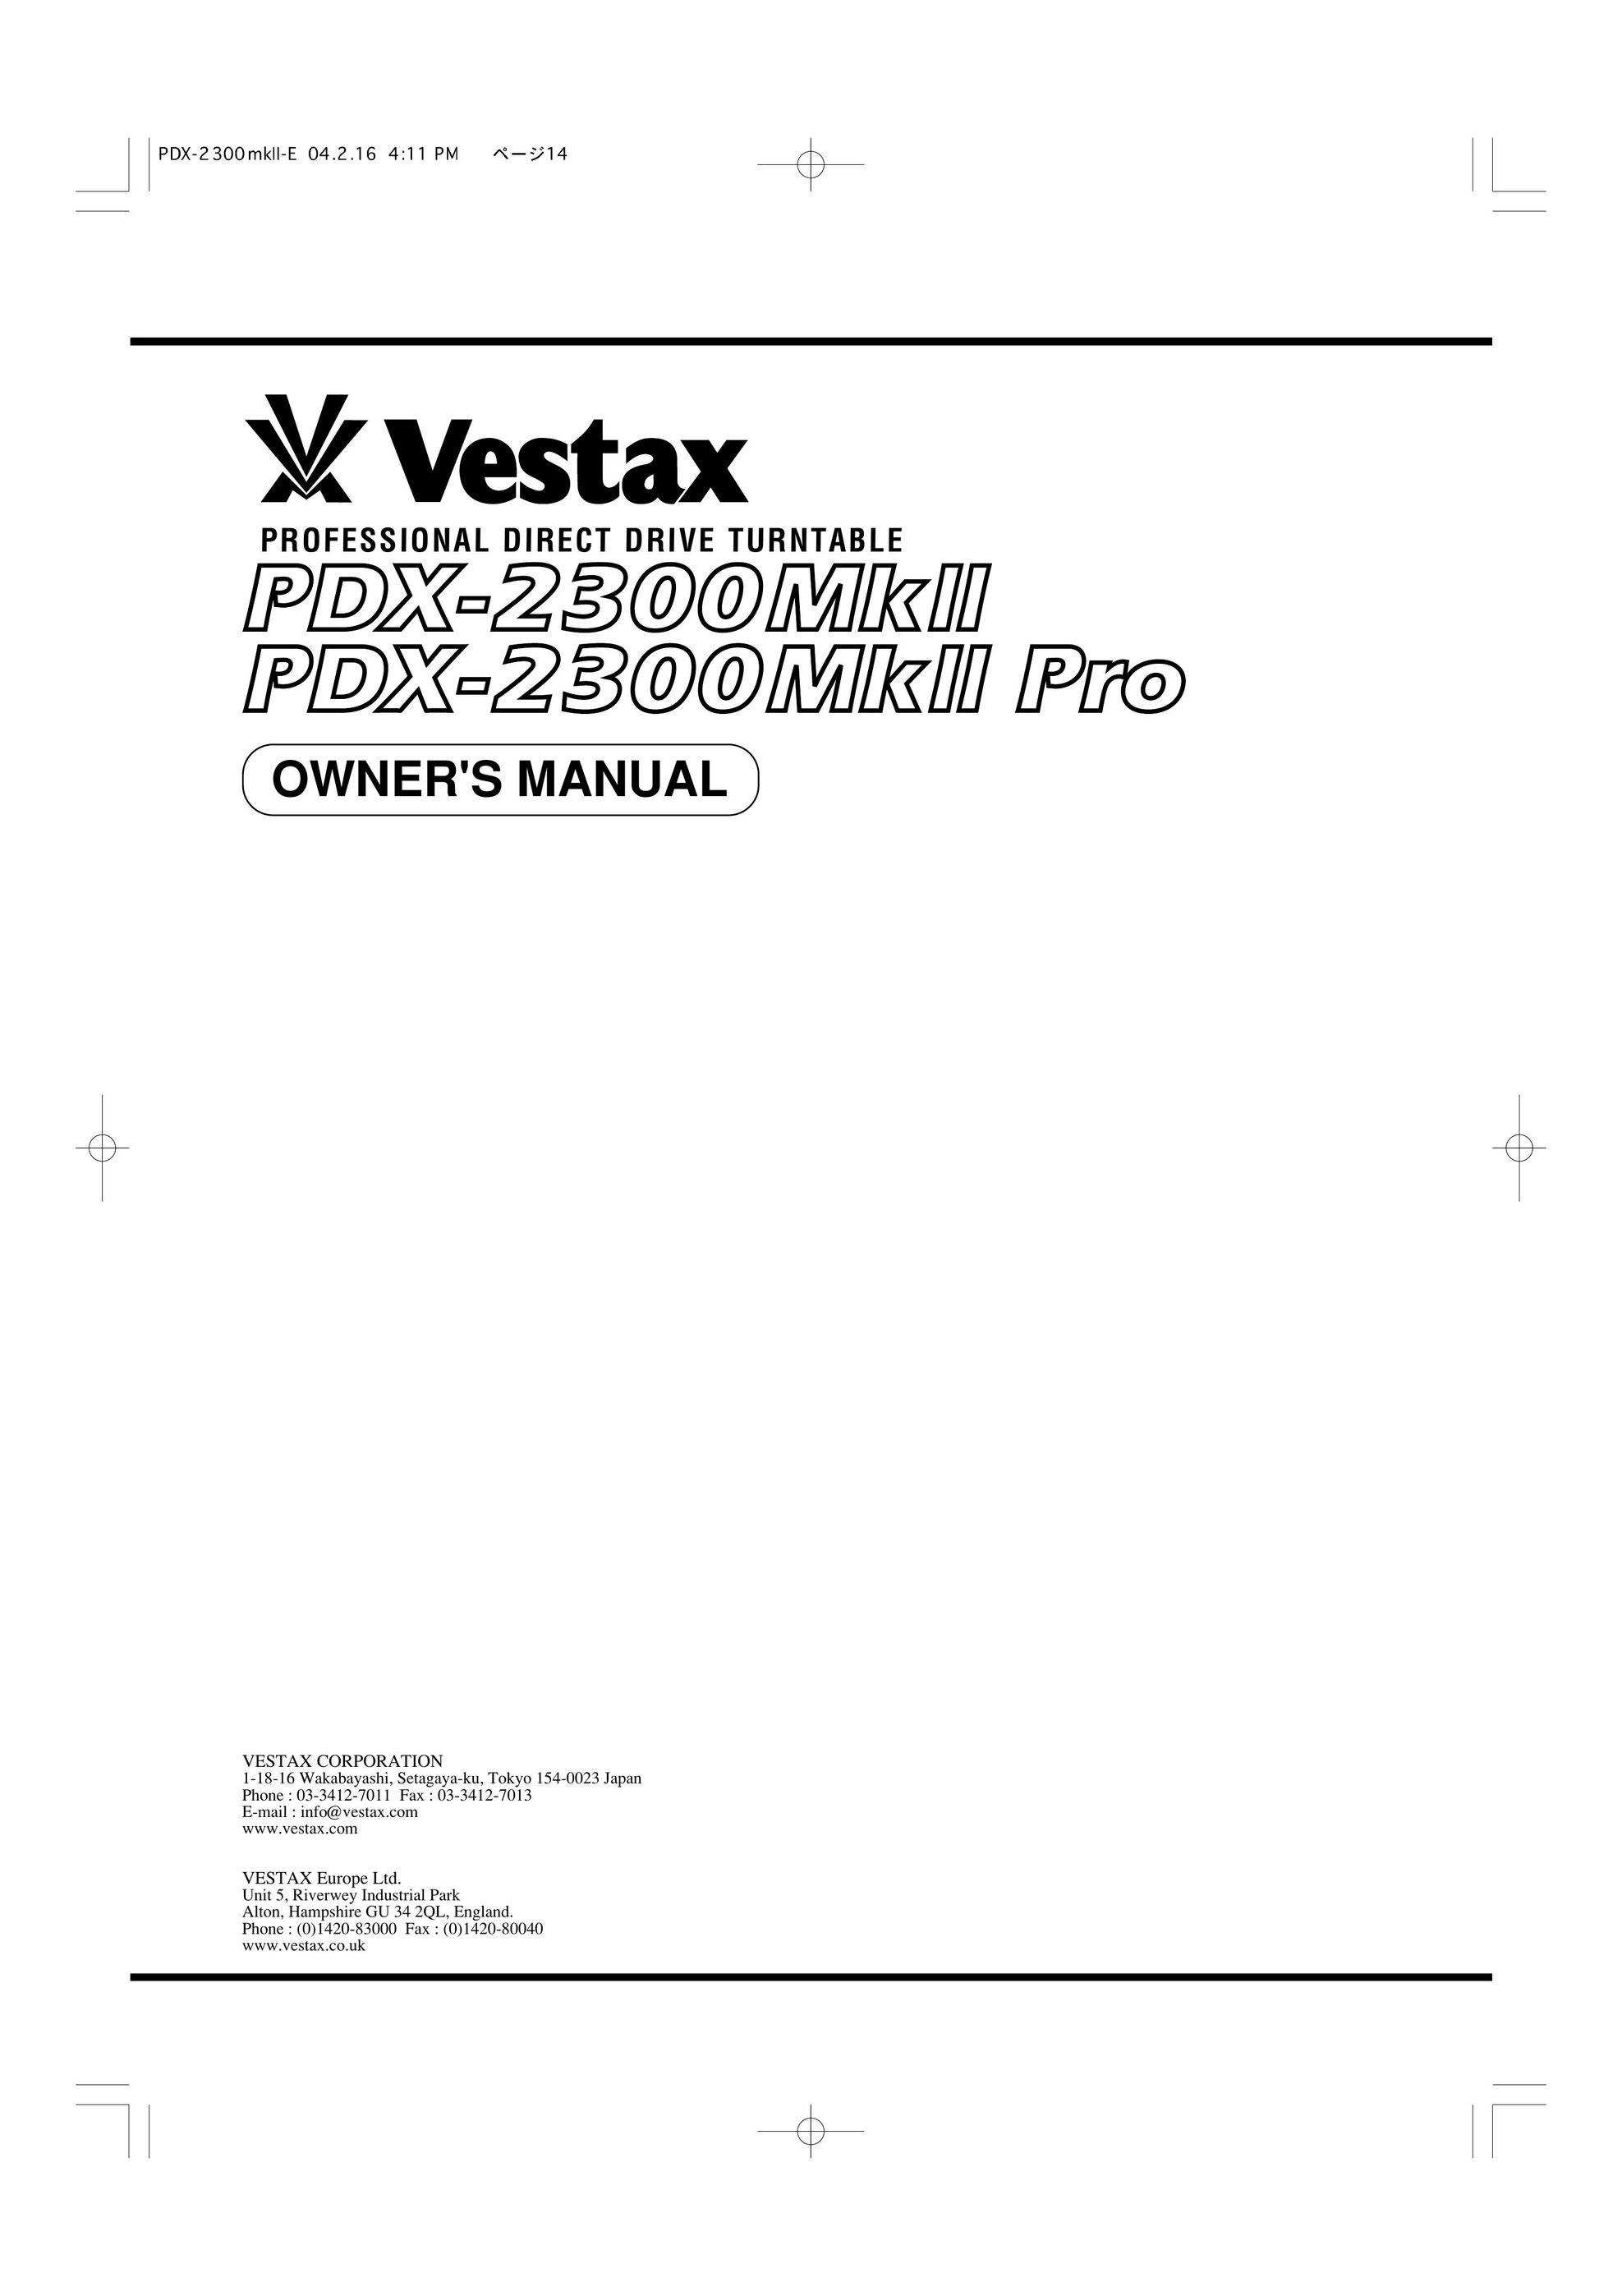 Vestax PDX-2300MkII, PDX-2300MkII Pro Turntable User Manual